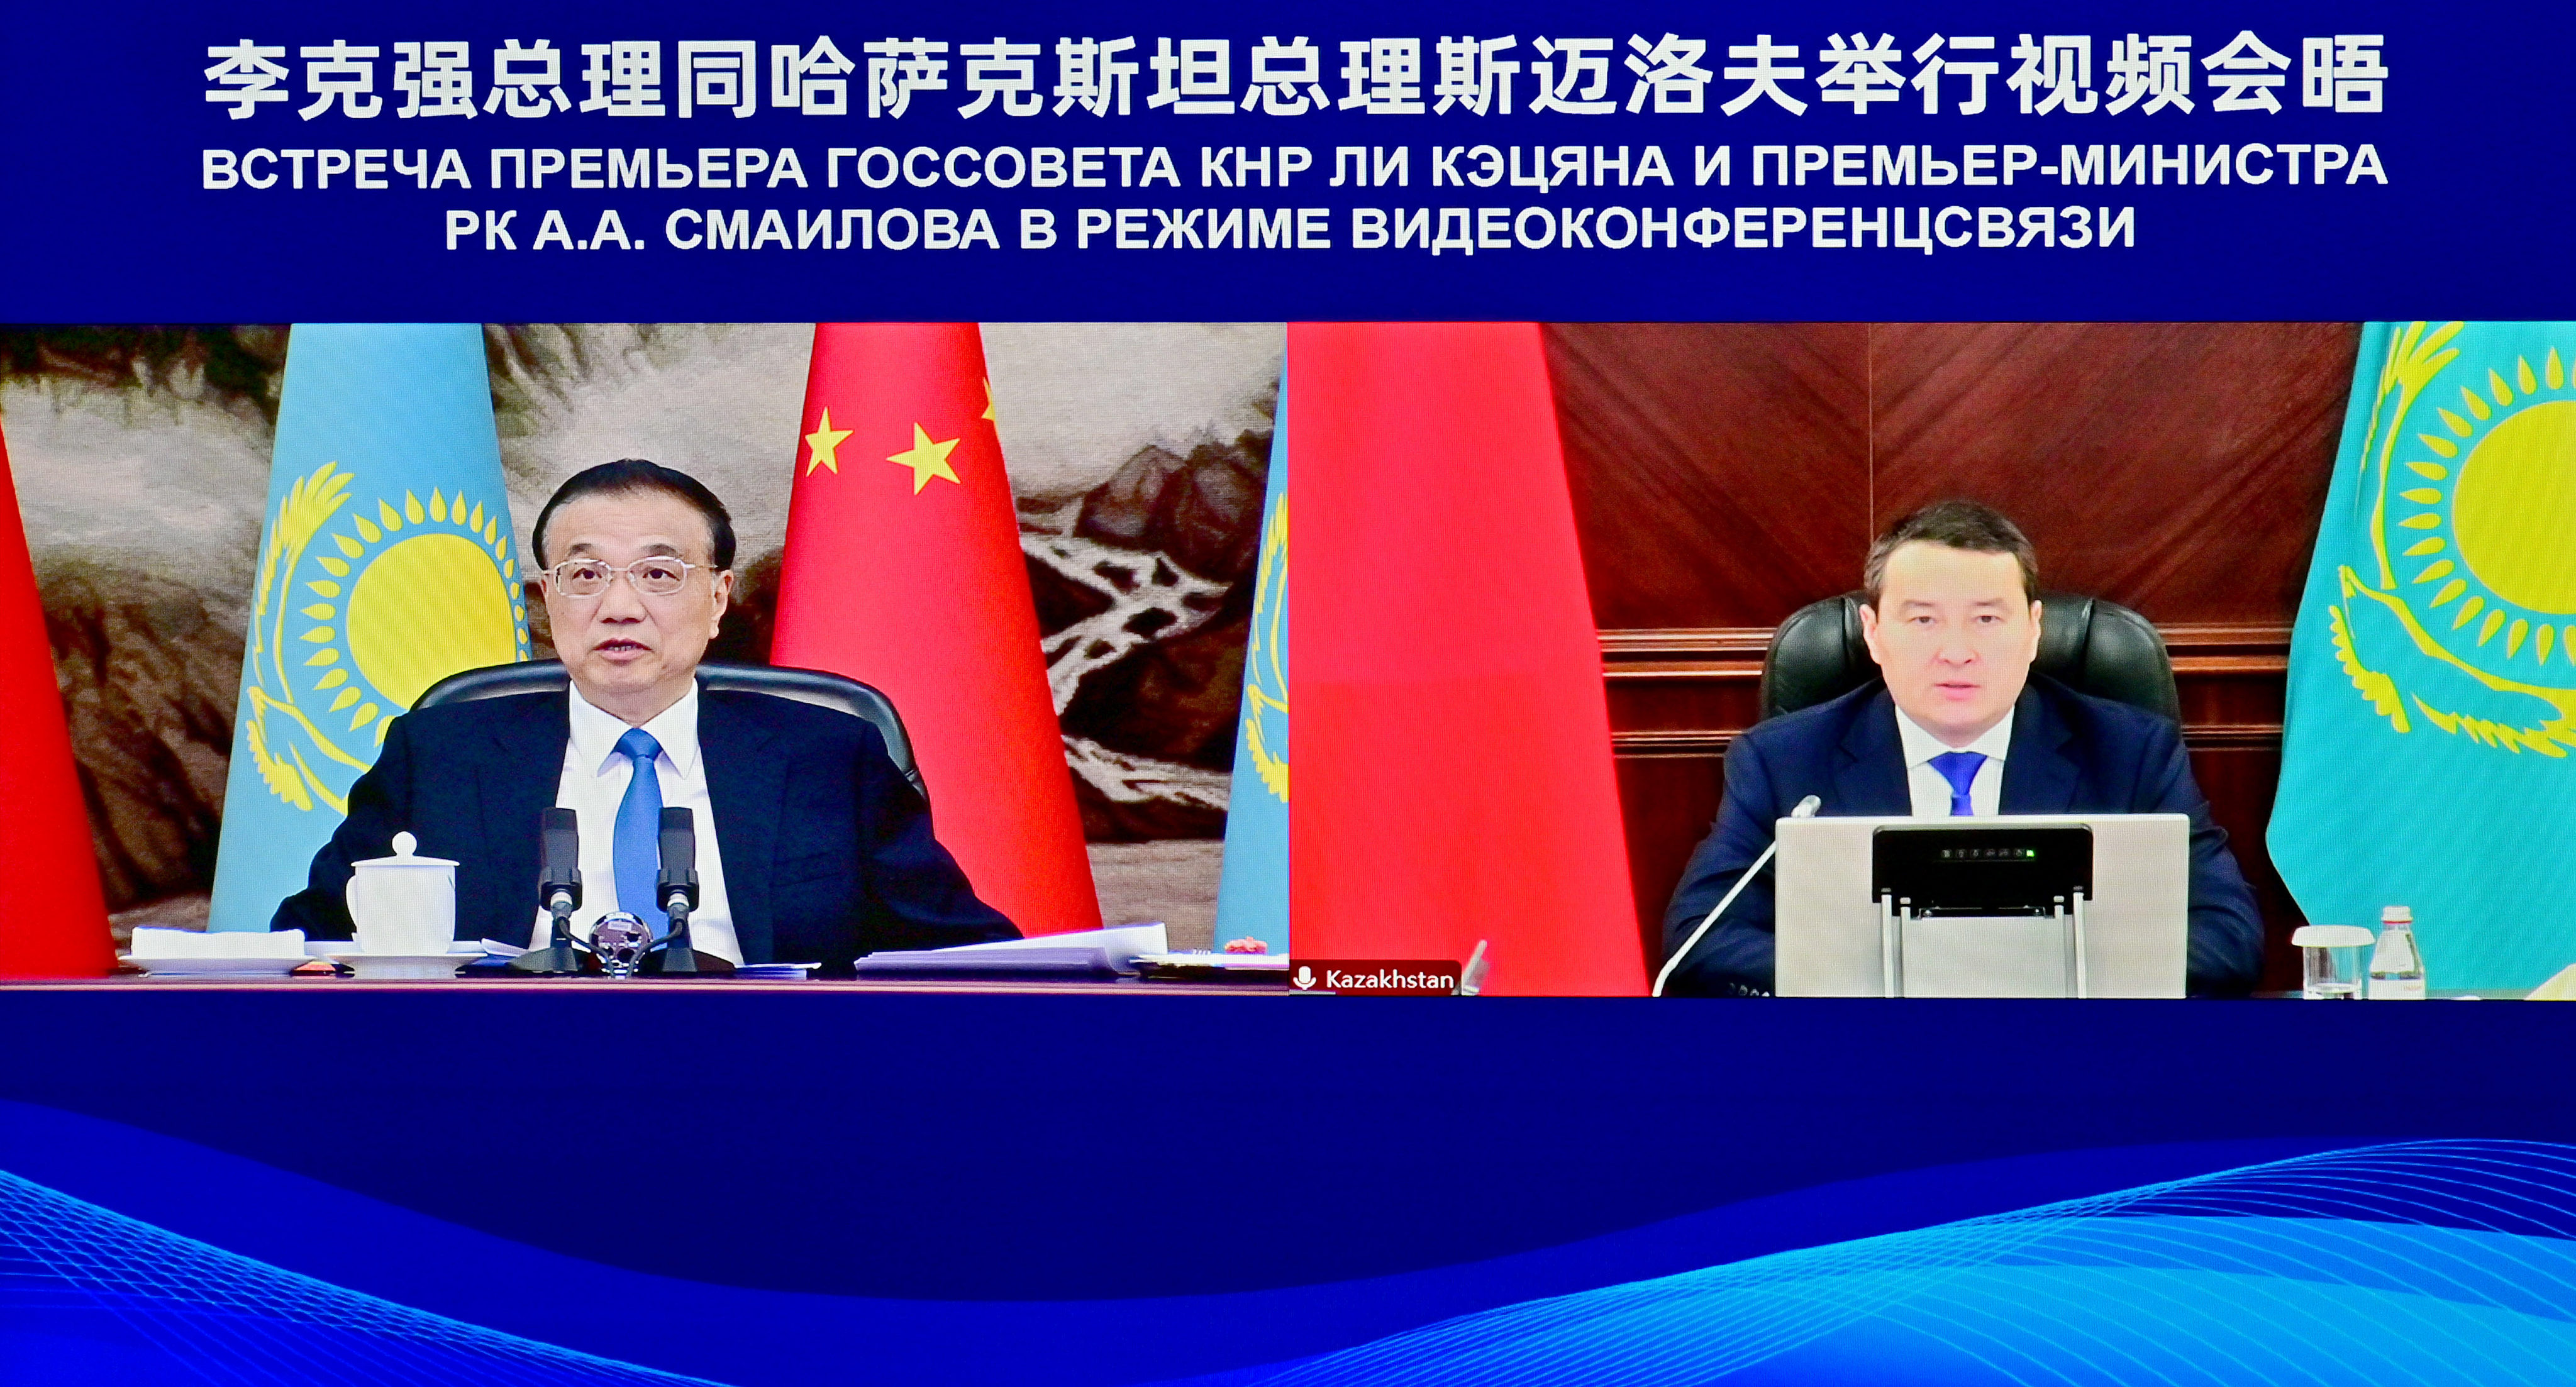 Premier Li Keqiang hailed energy cooperation, trade deals, and strengthening ties during a video link meeting with the Kazakh prime minister on Tuesday. Photo: Xinhua